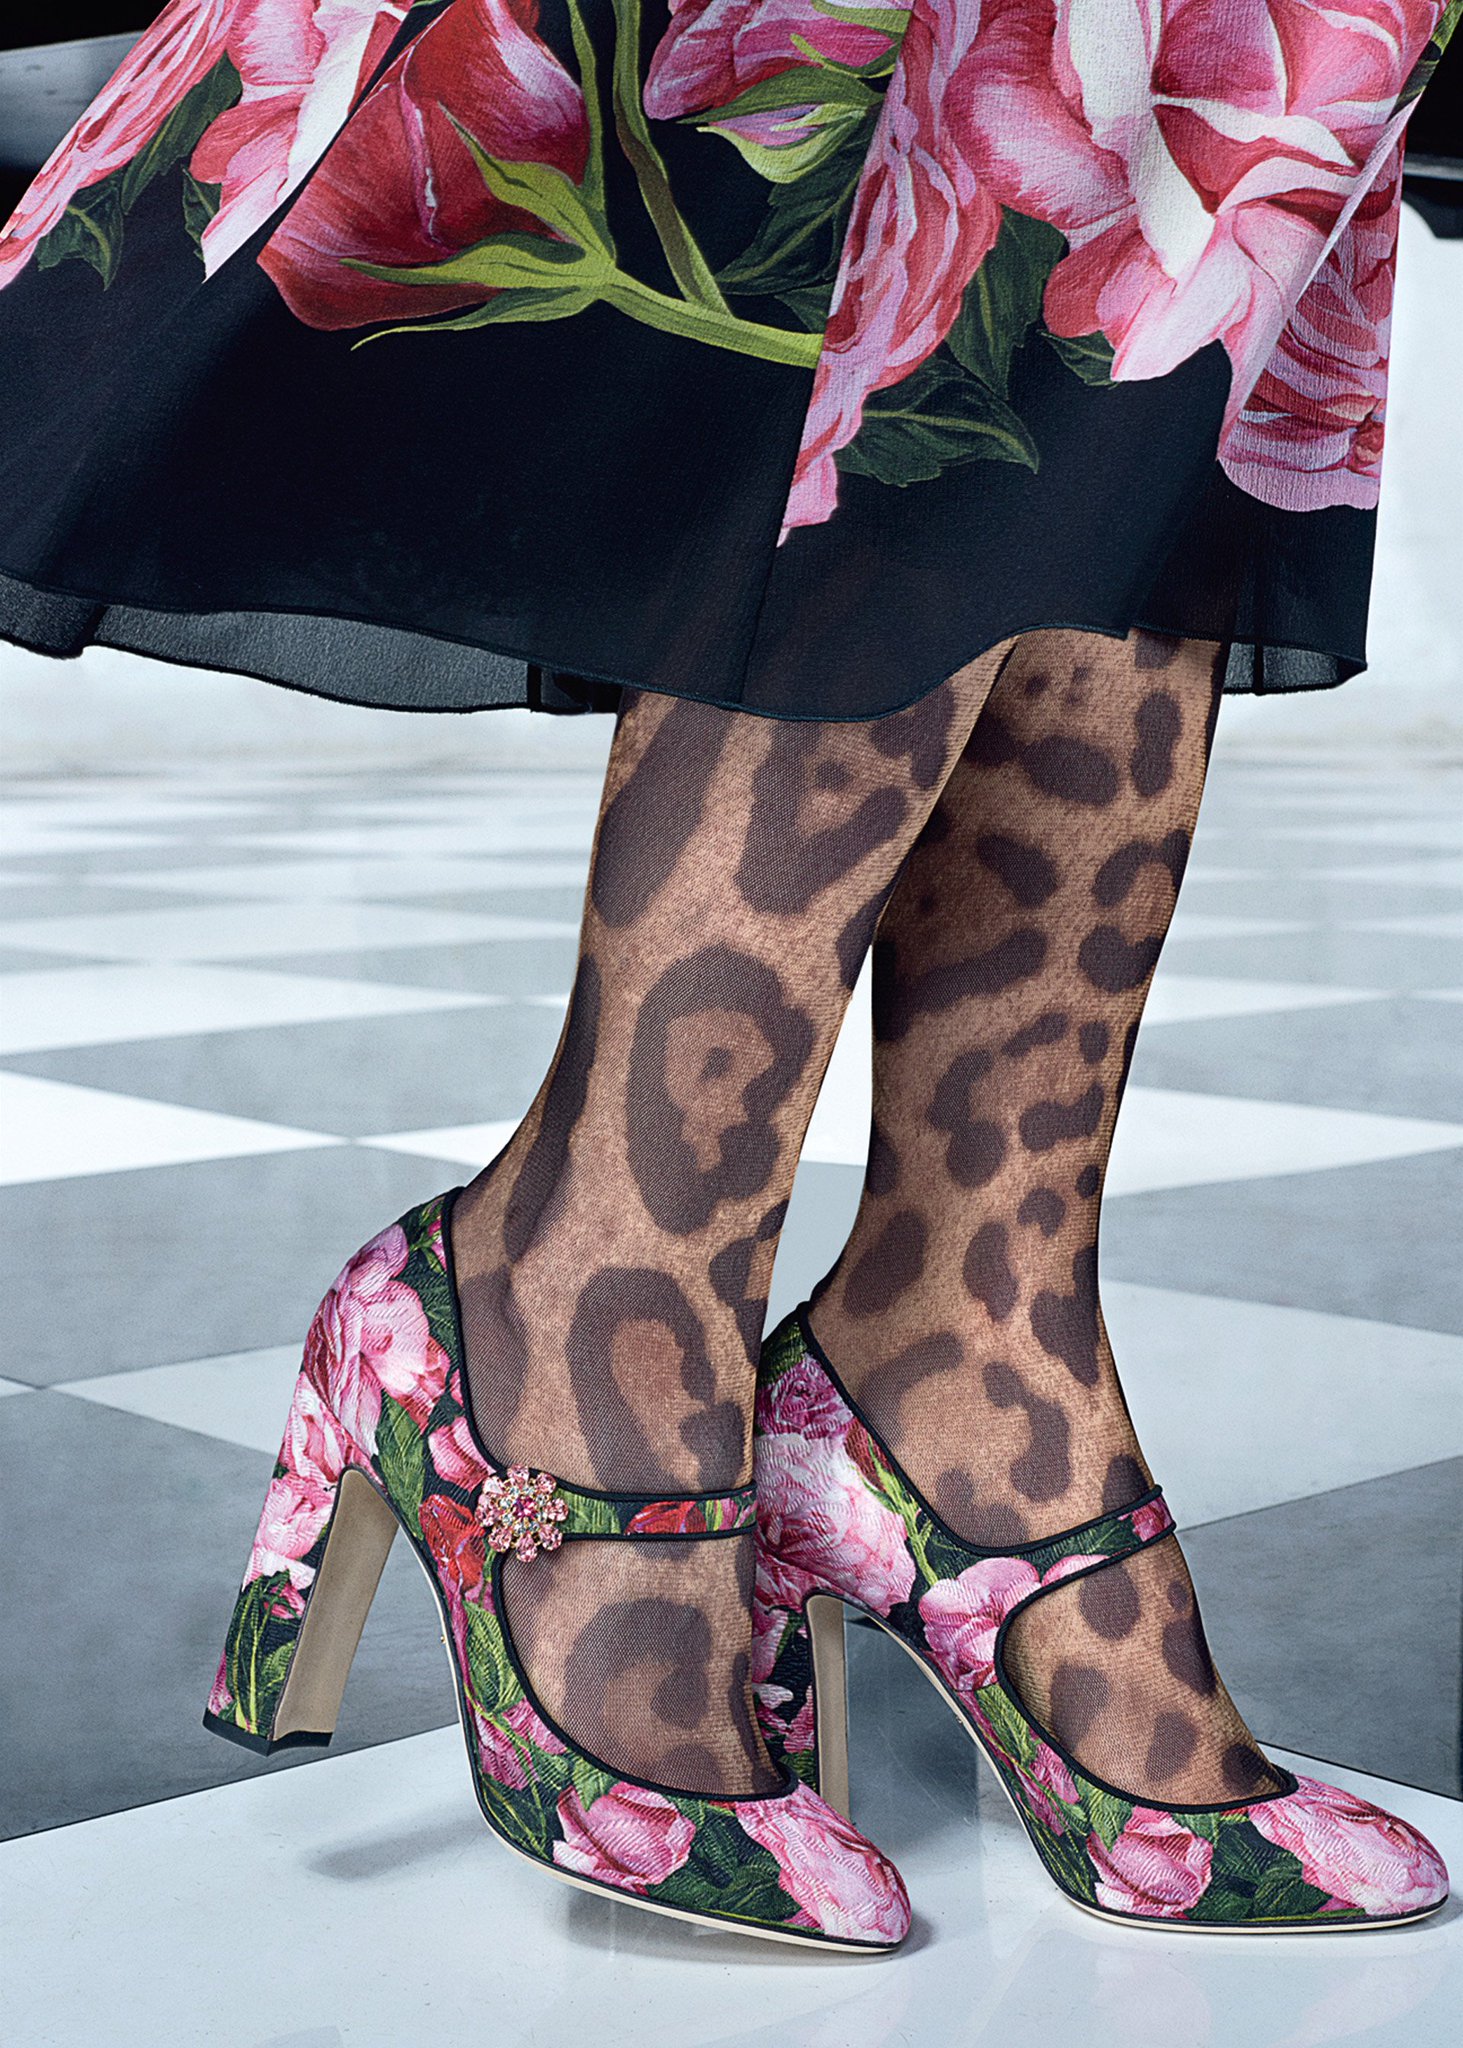 Dolce & Gabbana Leopard Printed Pony Fur Decorated with Roses